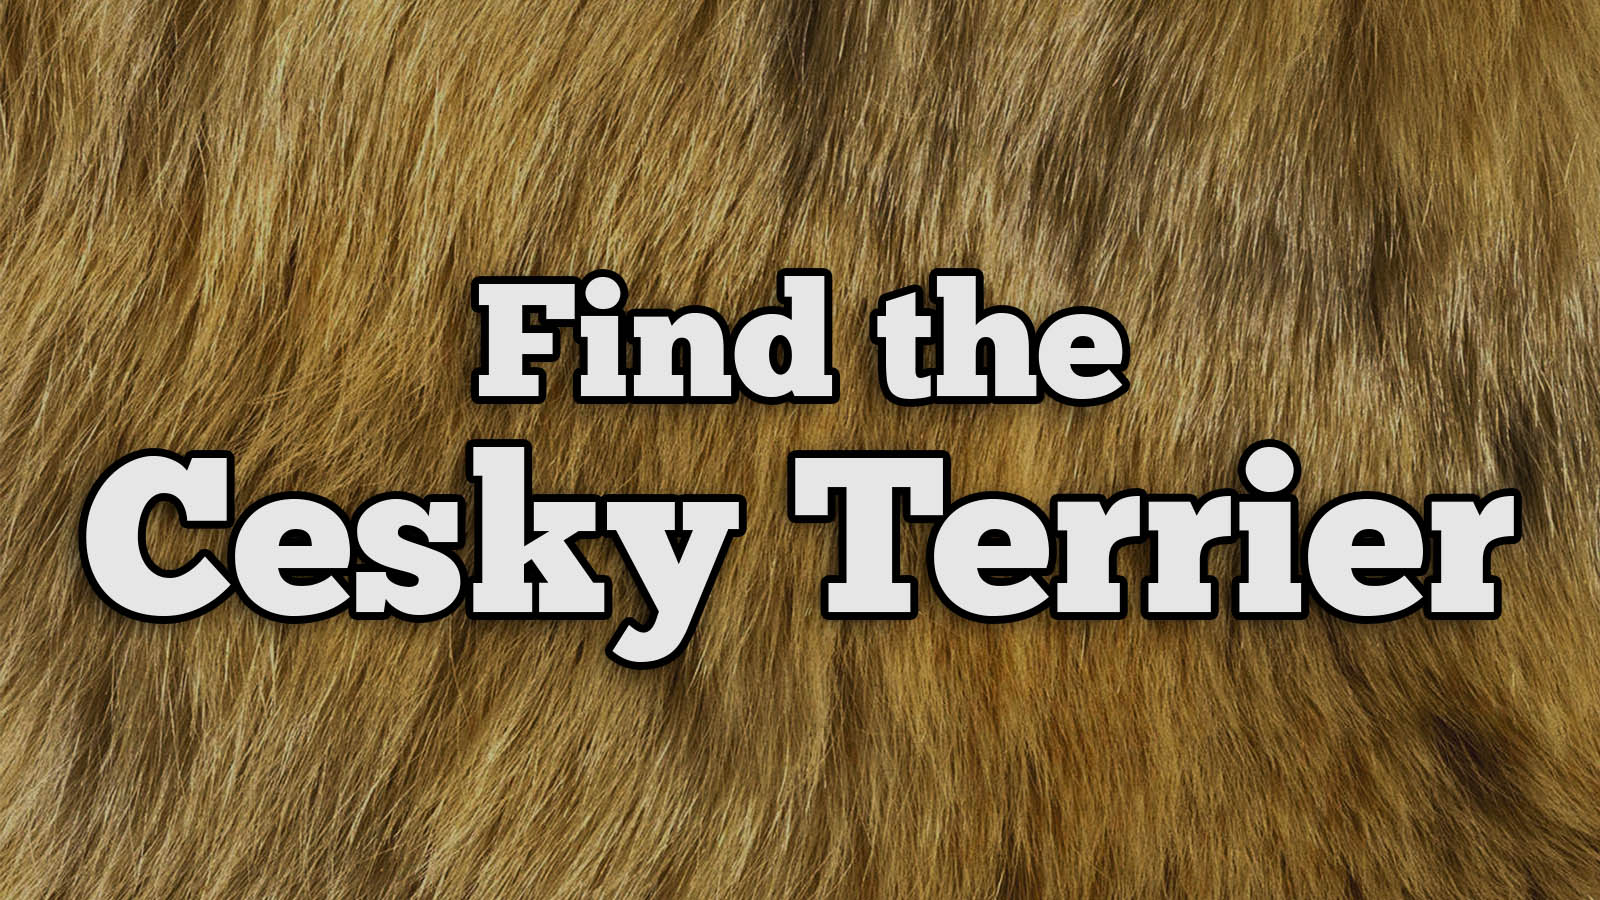 We Bet You Can’t Identify More Than 20/27 of These Dog Breeds Text Cesky Terrier